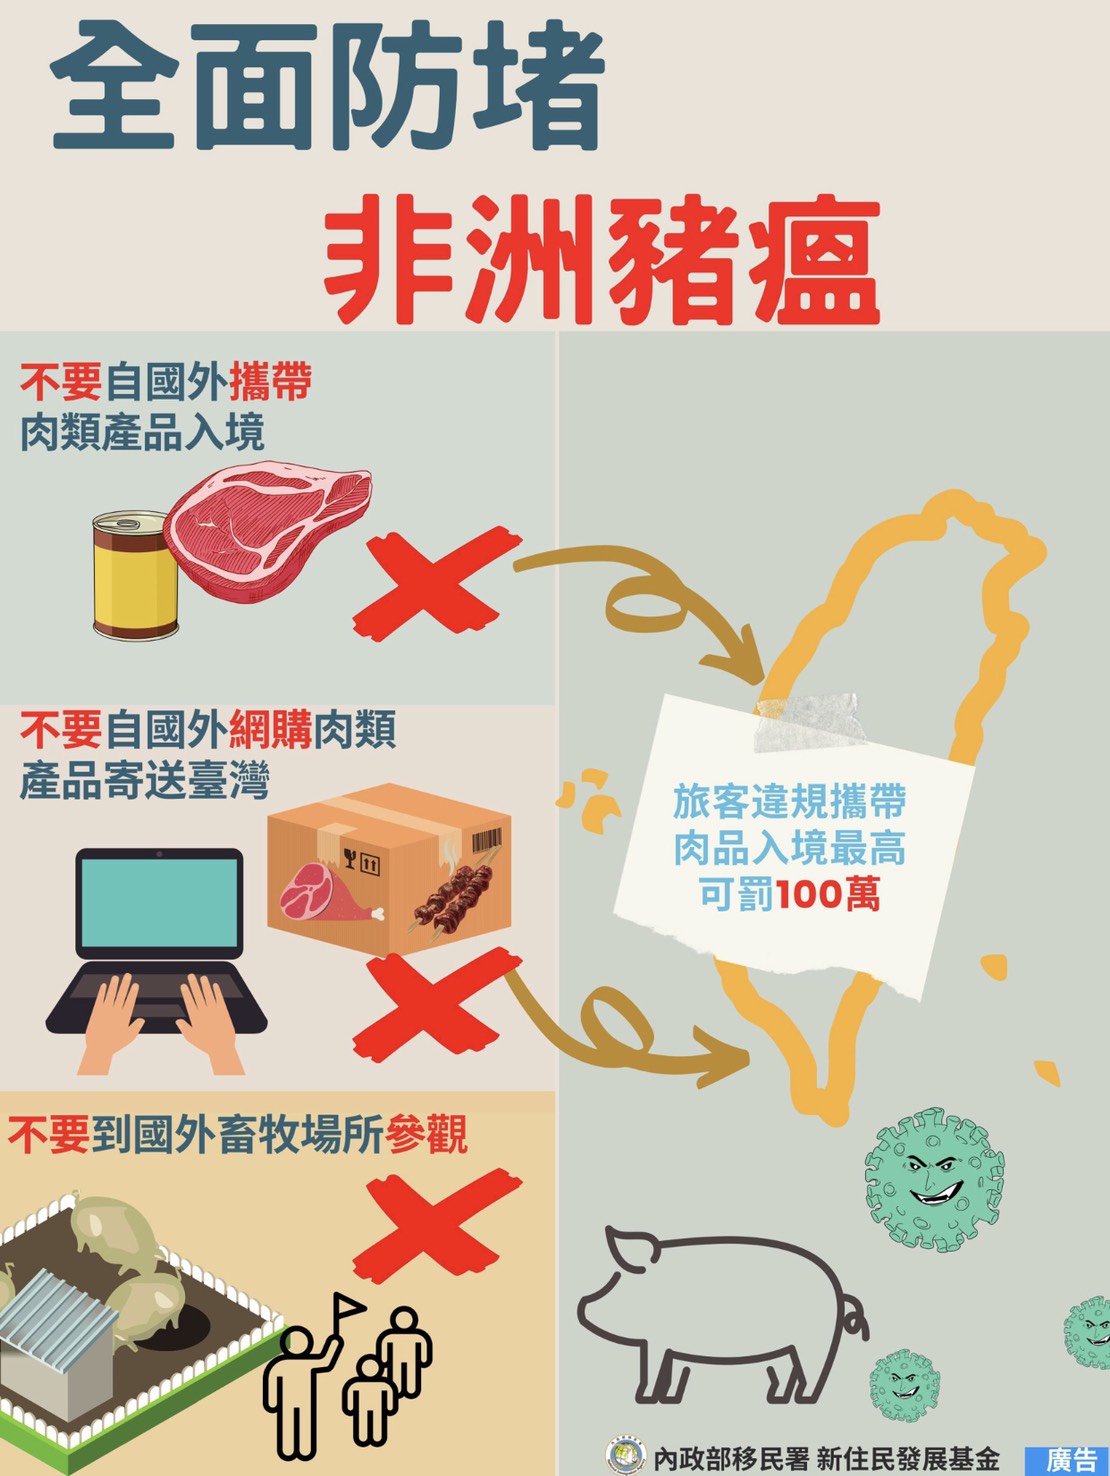 Prevention and blocking of the "African Swine Fever" across Taiwan. Photo/Provided by Hsinchu Service Station